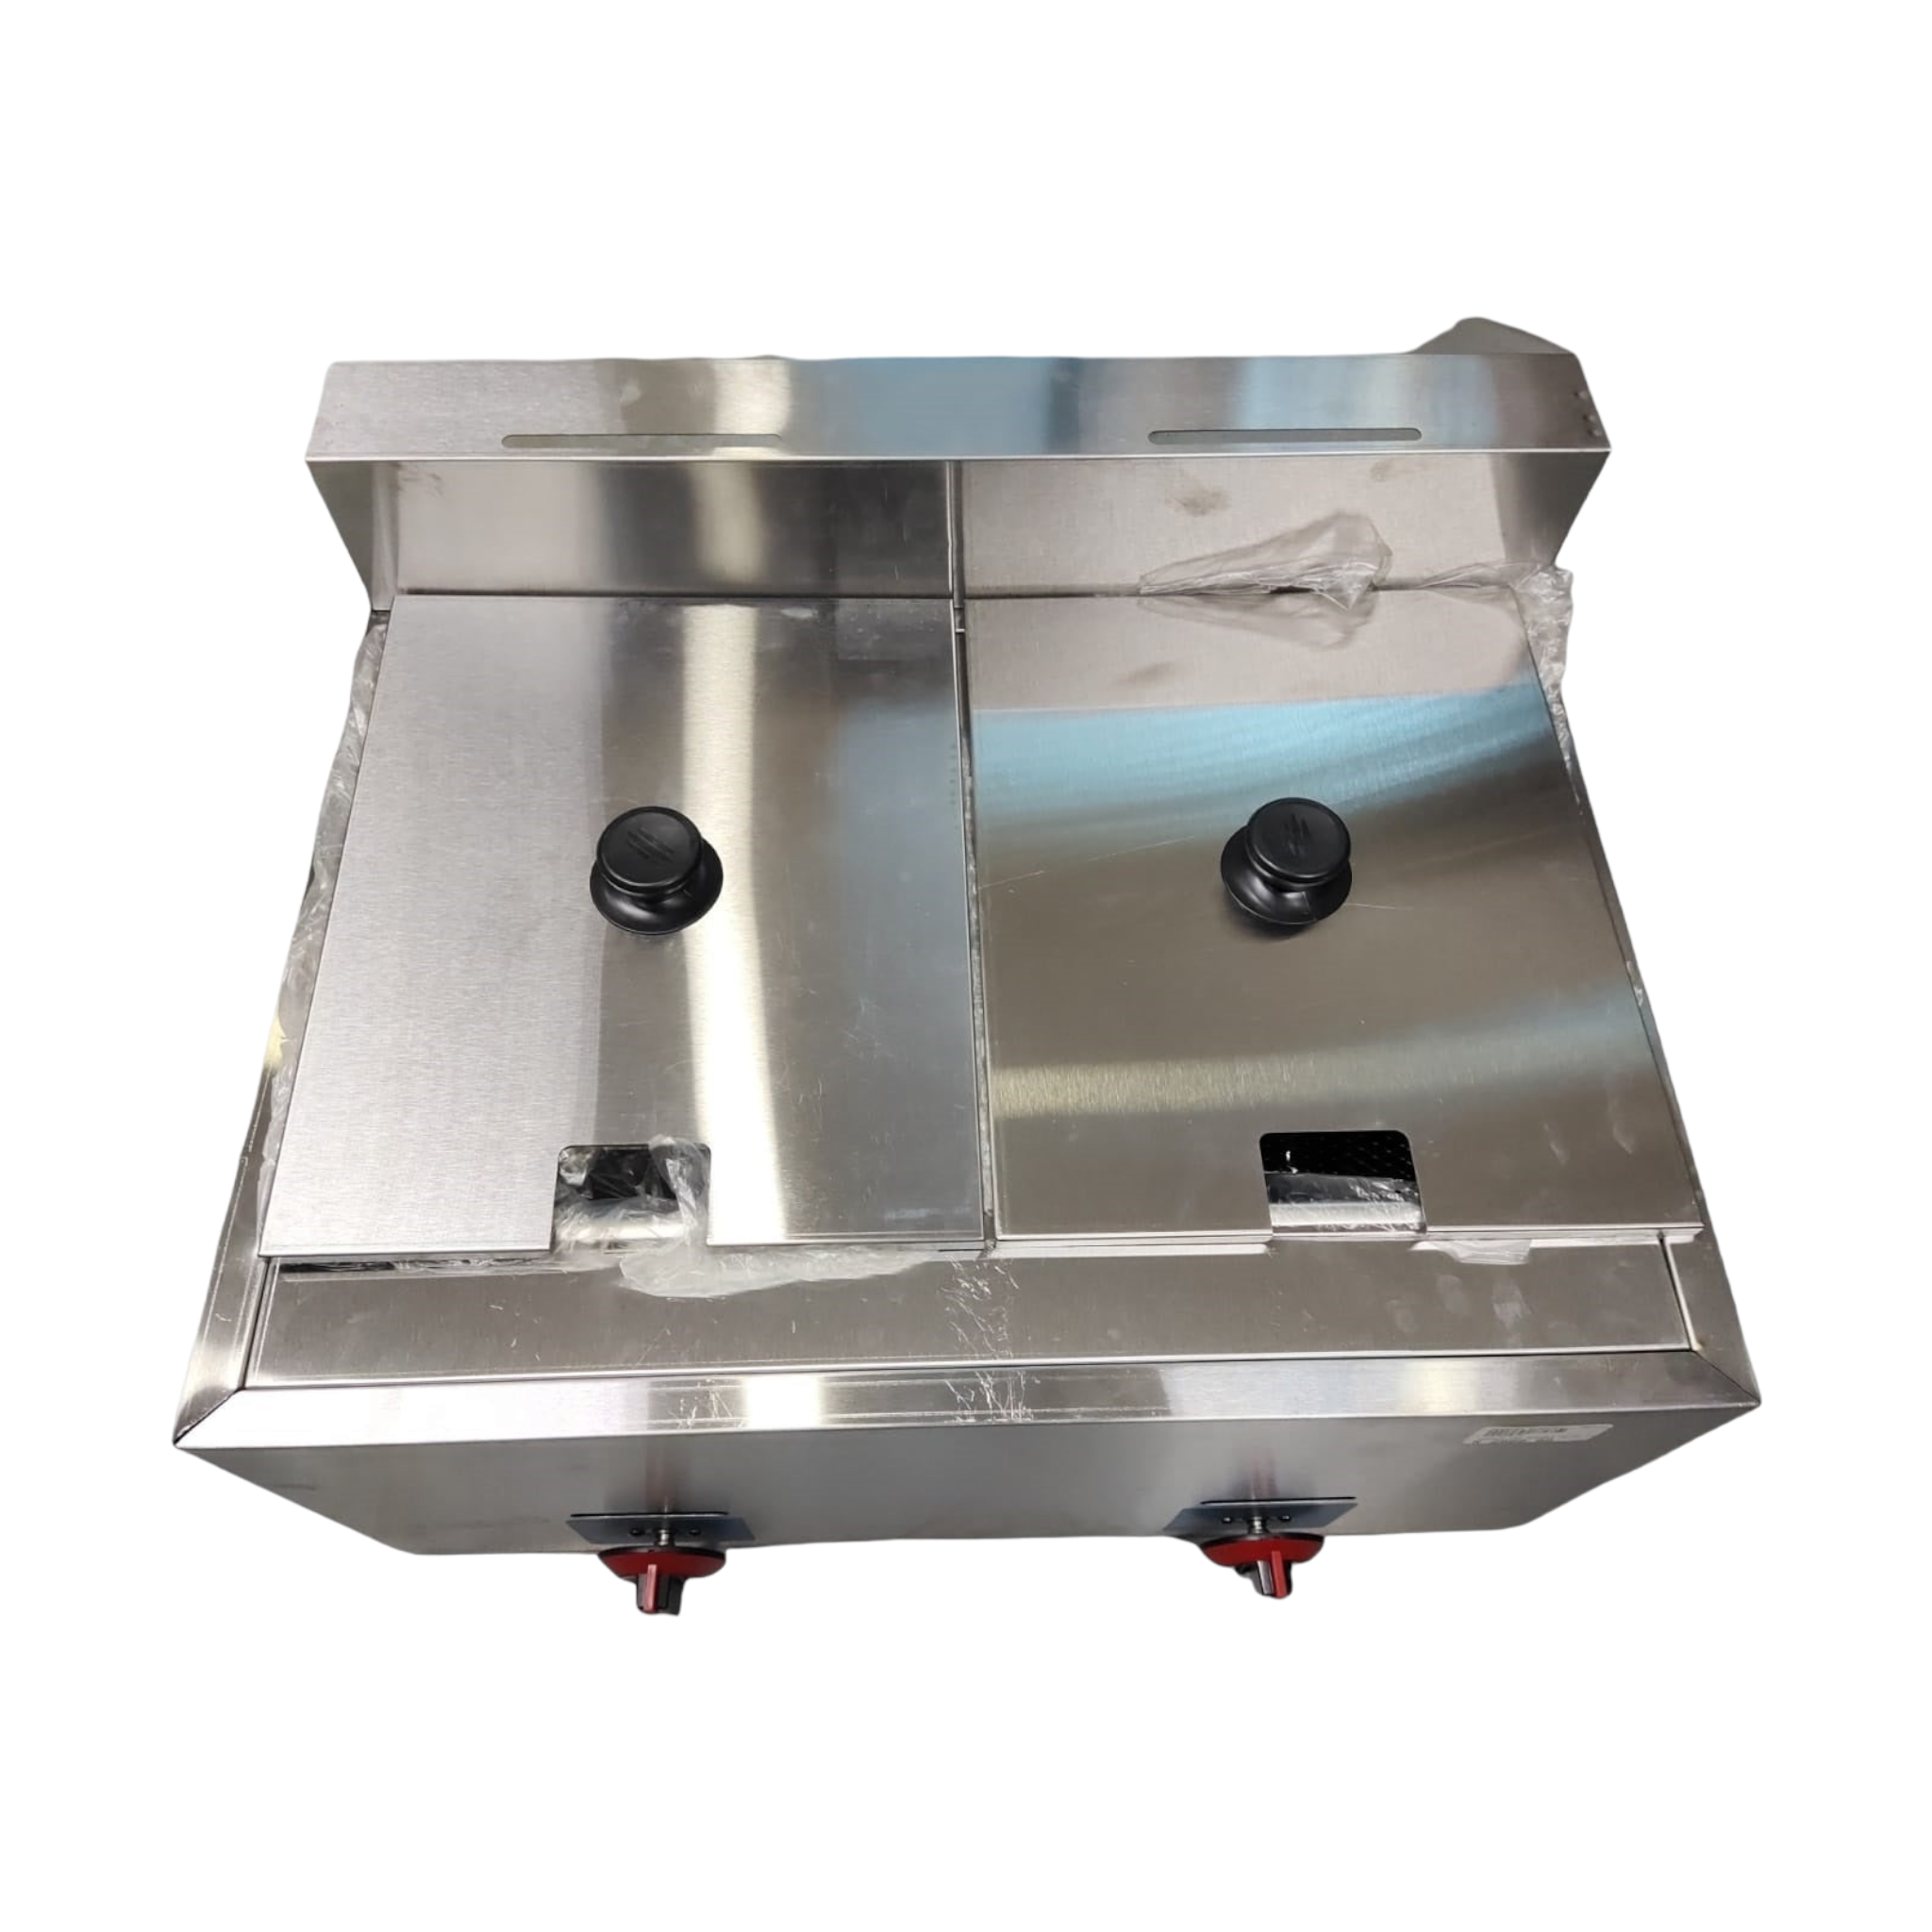 Gas Fryer Double Deep 2x6L with Safety Value